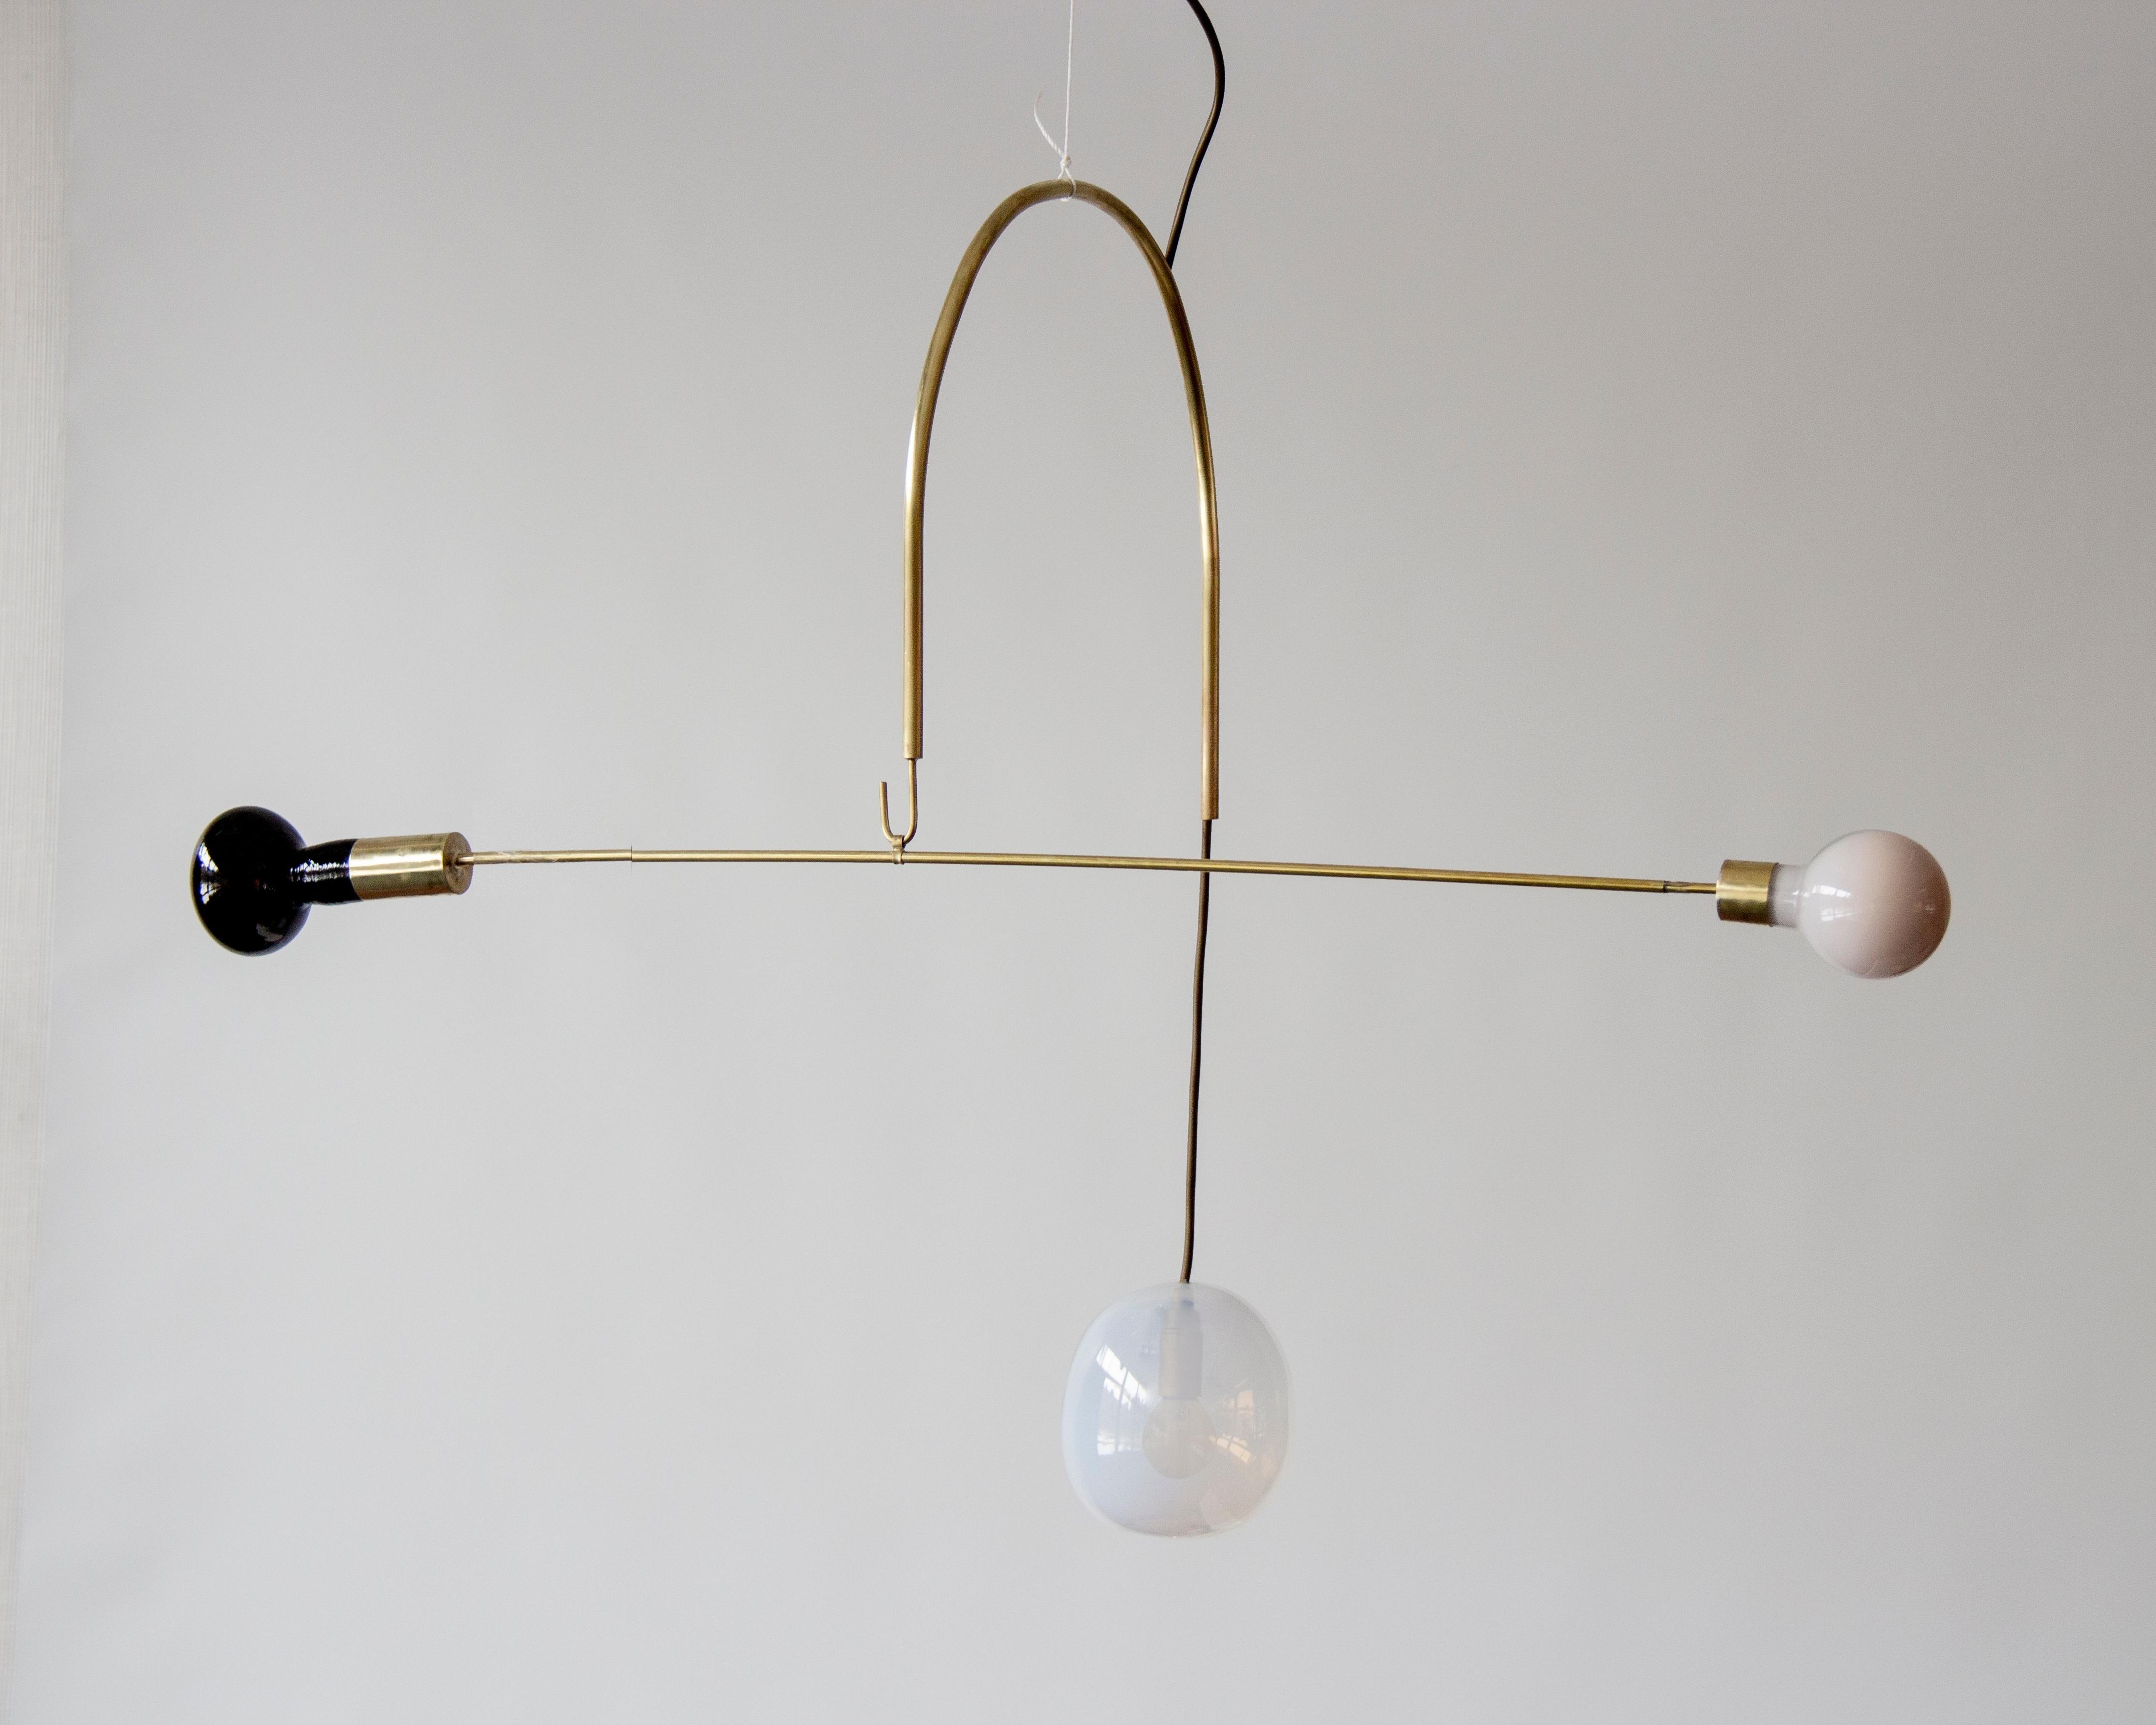 Sculptural light no. 67 by Milla Vaahtera.
Dimensions: W 85 x L 40 x H 60 cm.
Materials: glass, brass.

In 2020 Milla Vaahtera started a series of unique sculptural lights made out of brass and hand blown glass.
